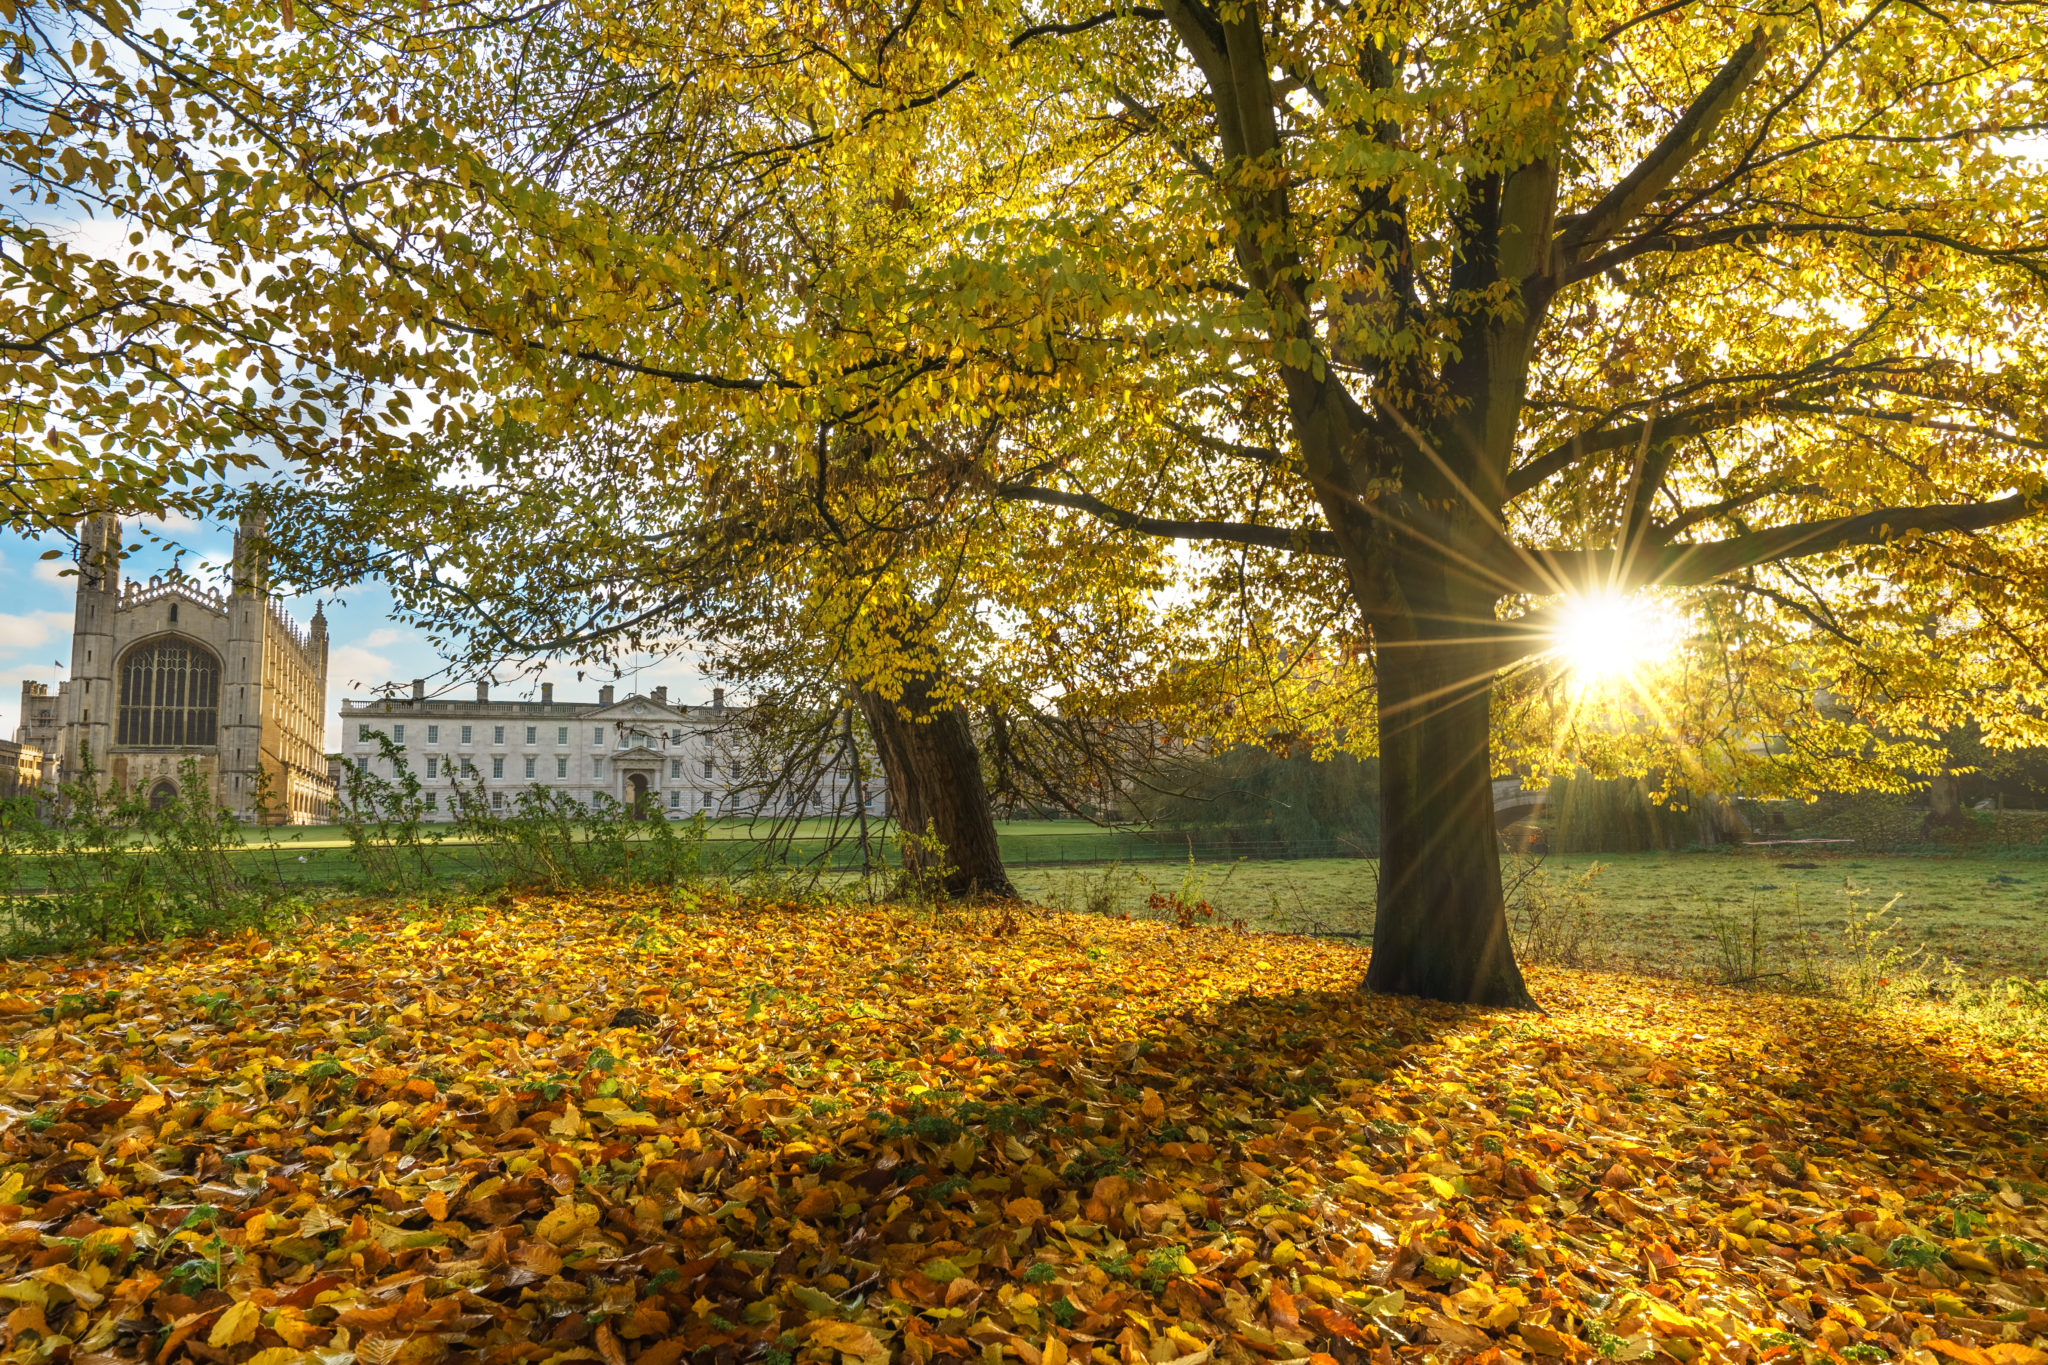 8 best places to enjoy autumn in the UK | WTM Global Hub